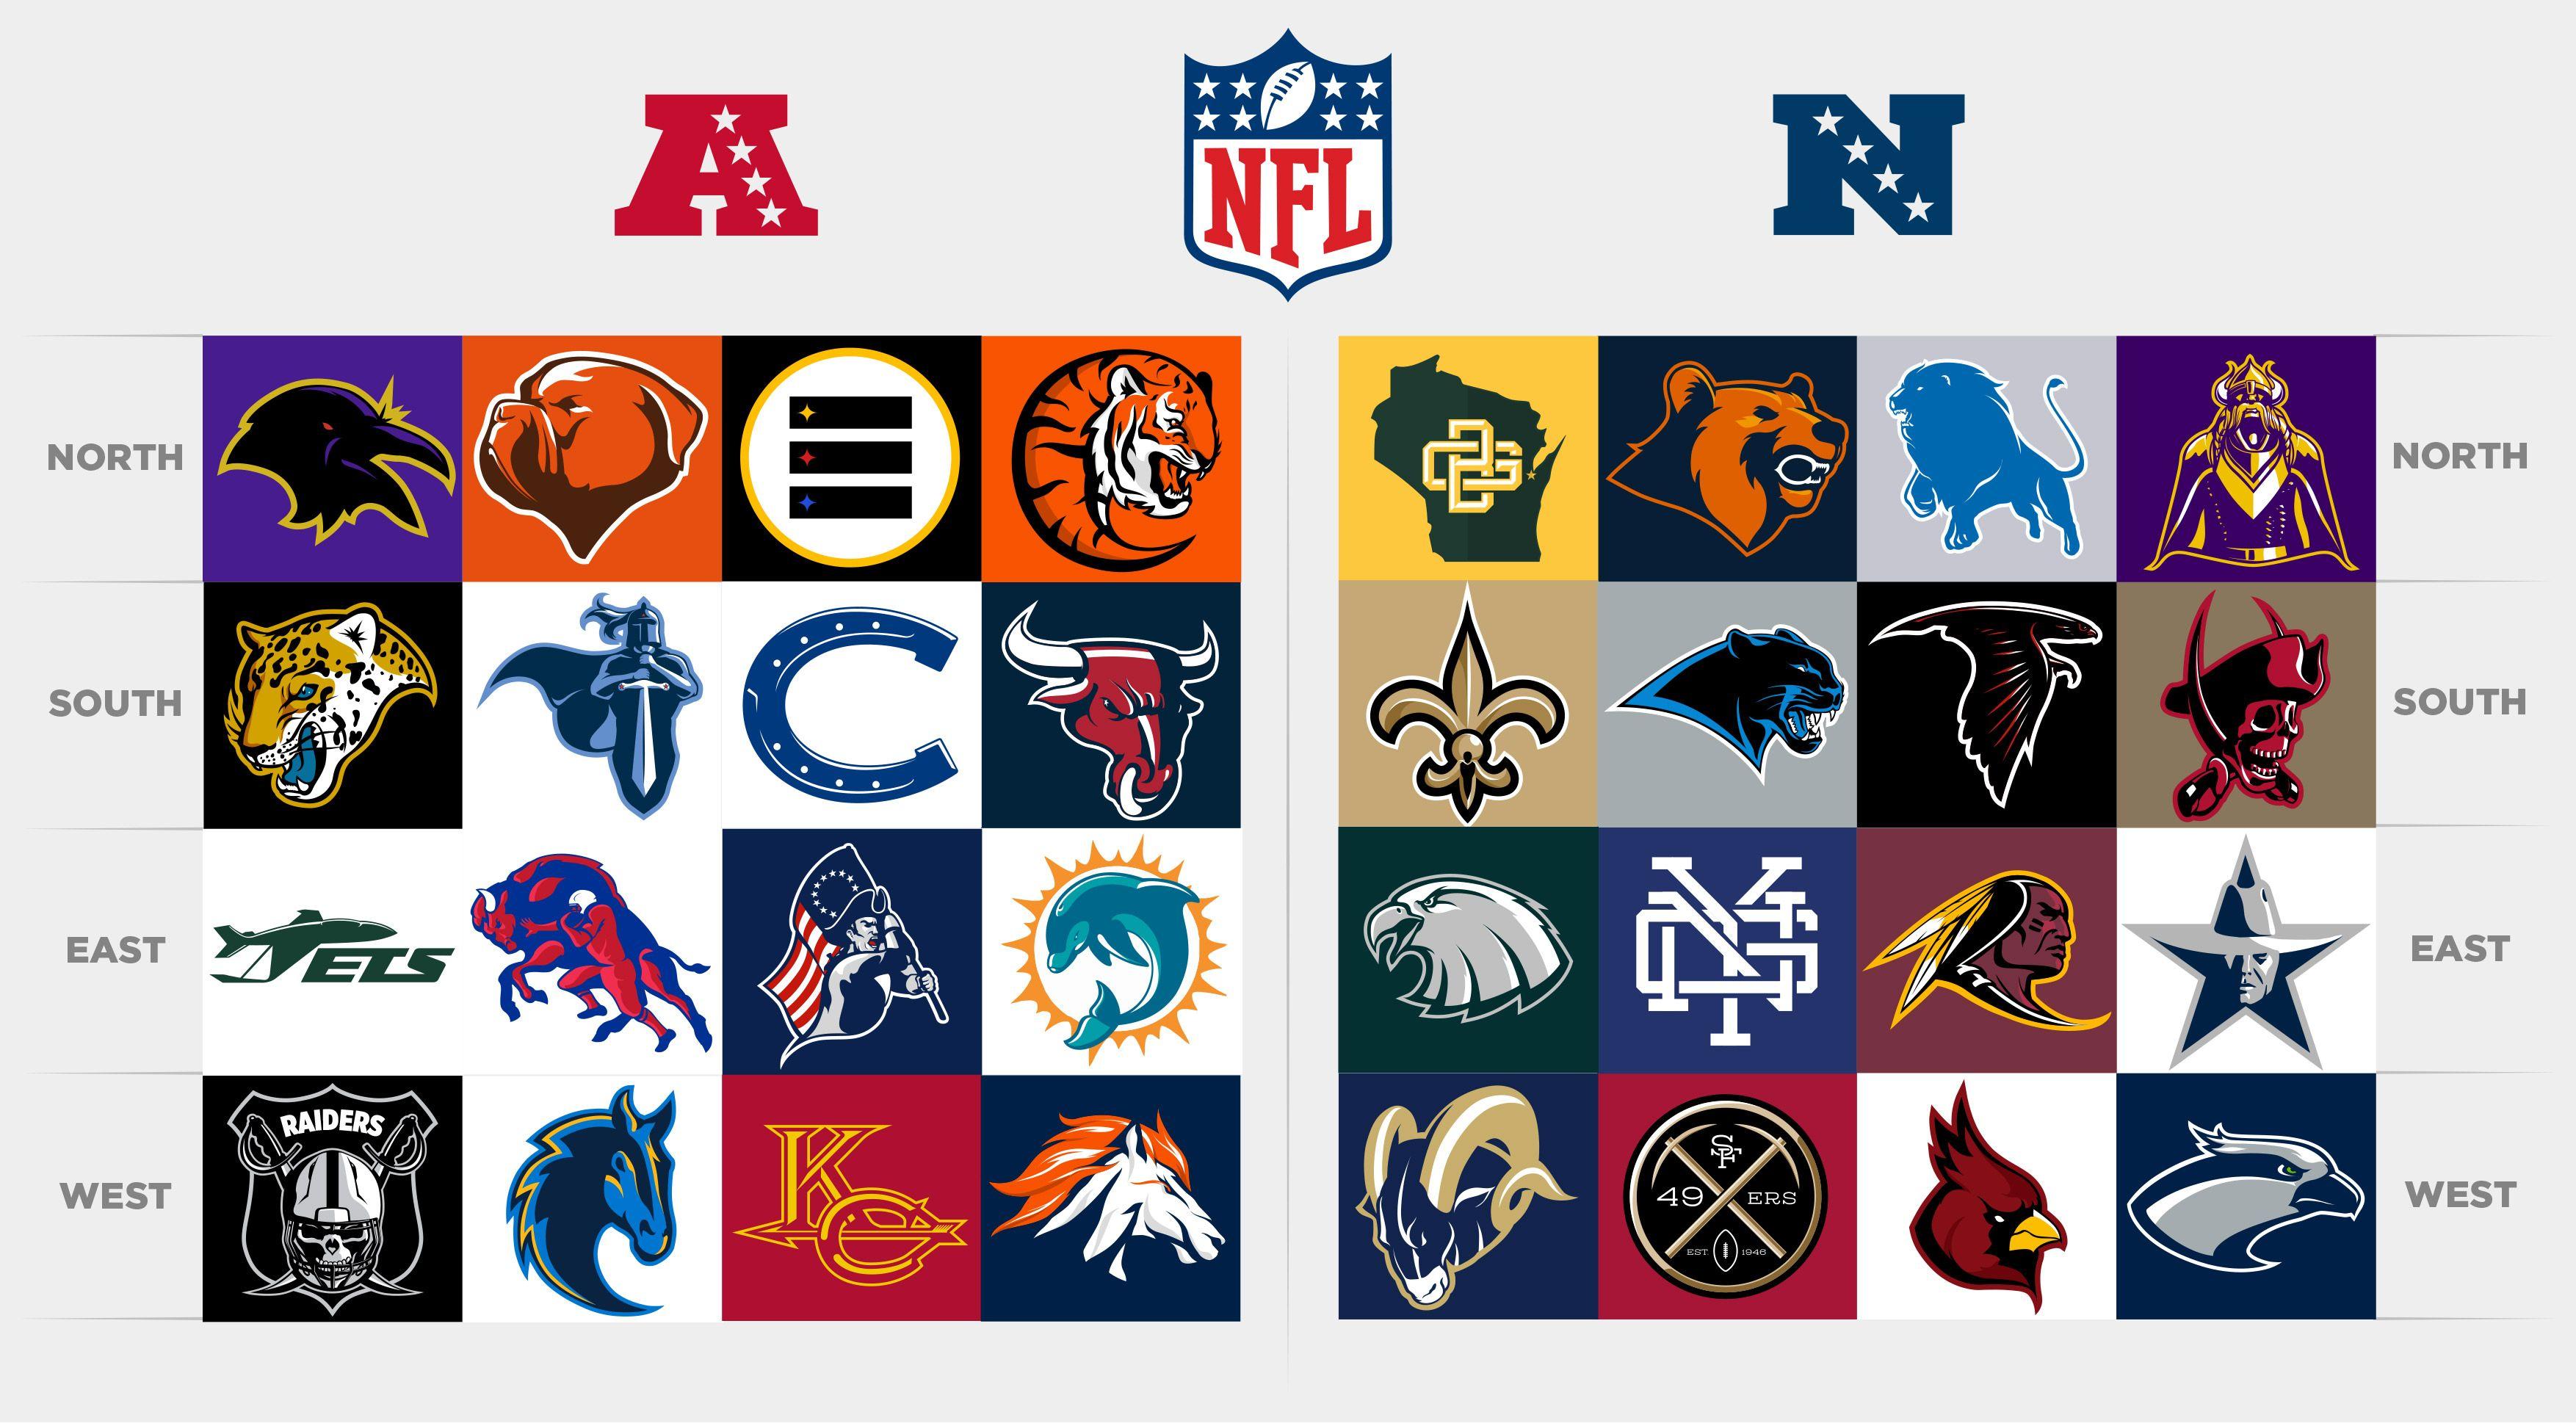 Old NFL Football Logo - Check Out (And Nitpick) These Redesigned NFL Logos